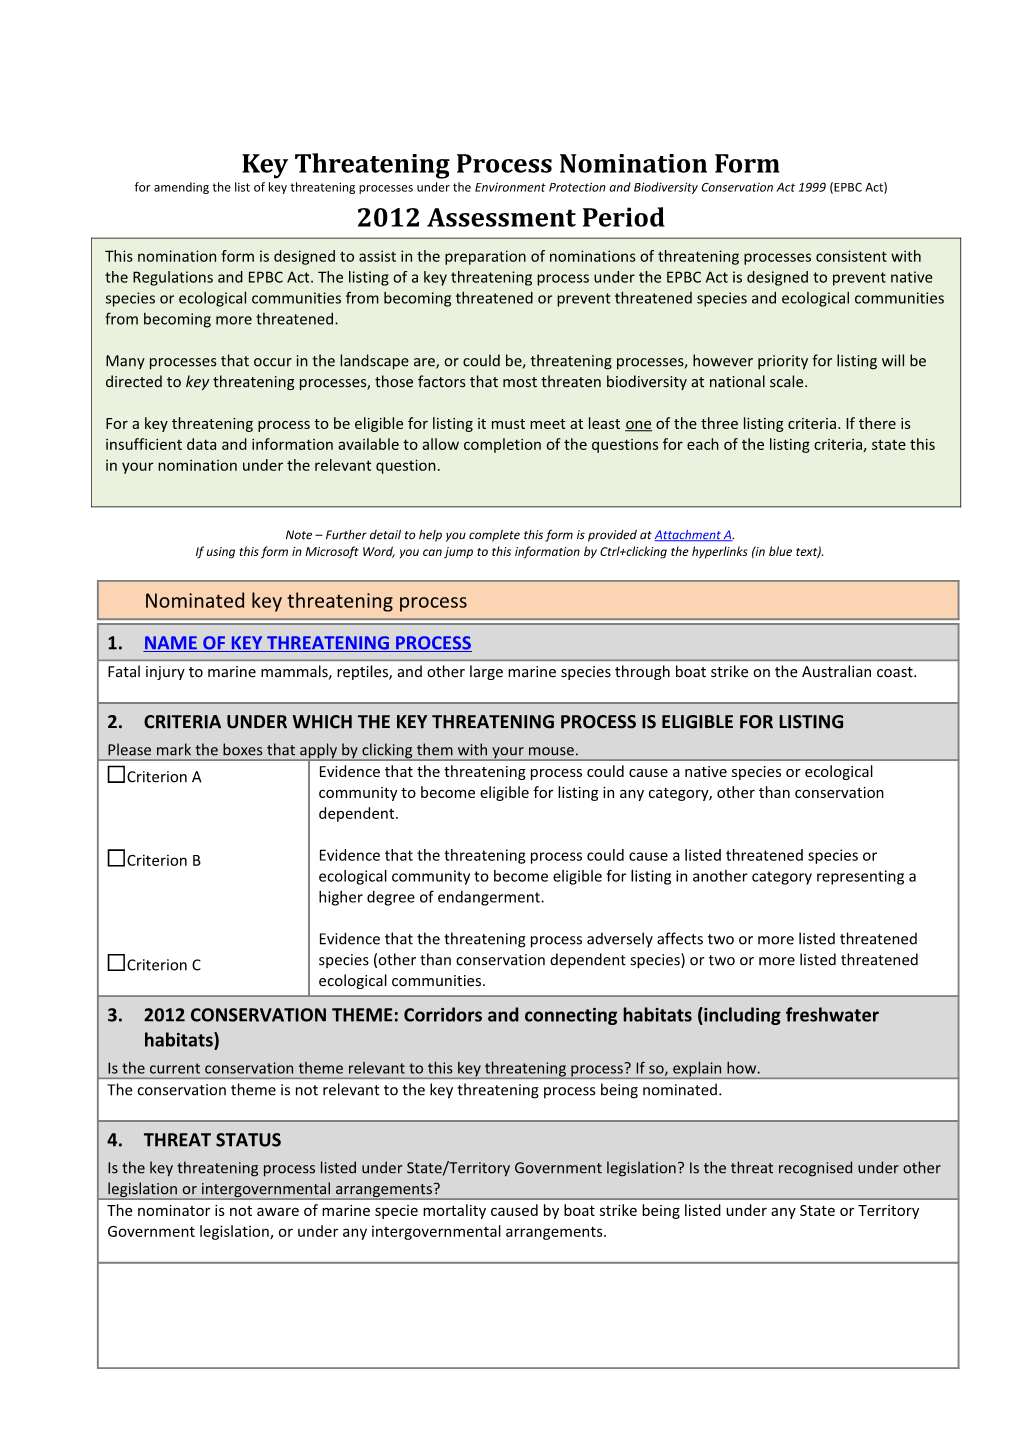 Key Threatening Process Nomination Form - Fatal Injury to Marine Mammals, Reptiles, And